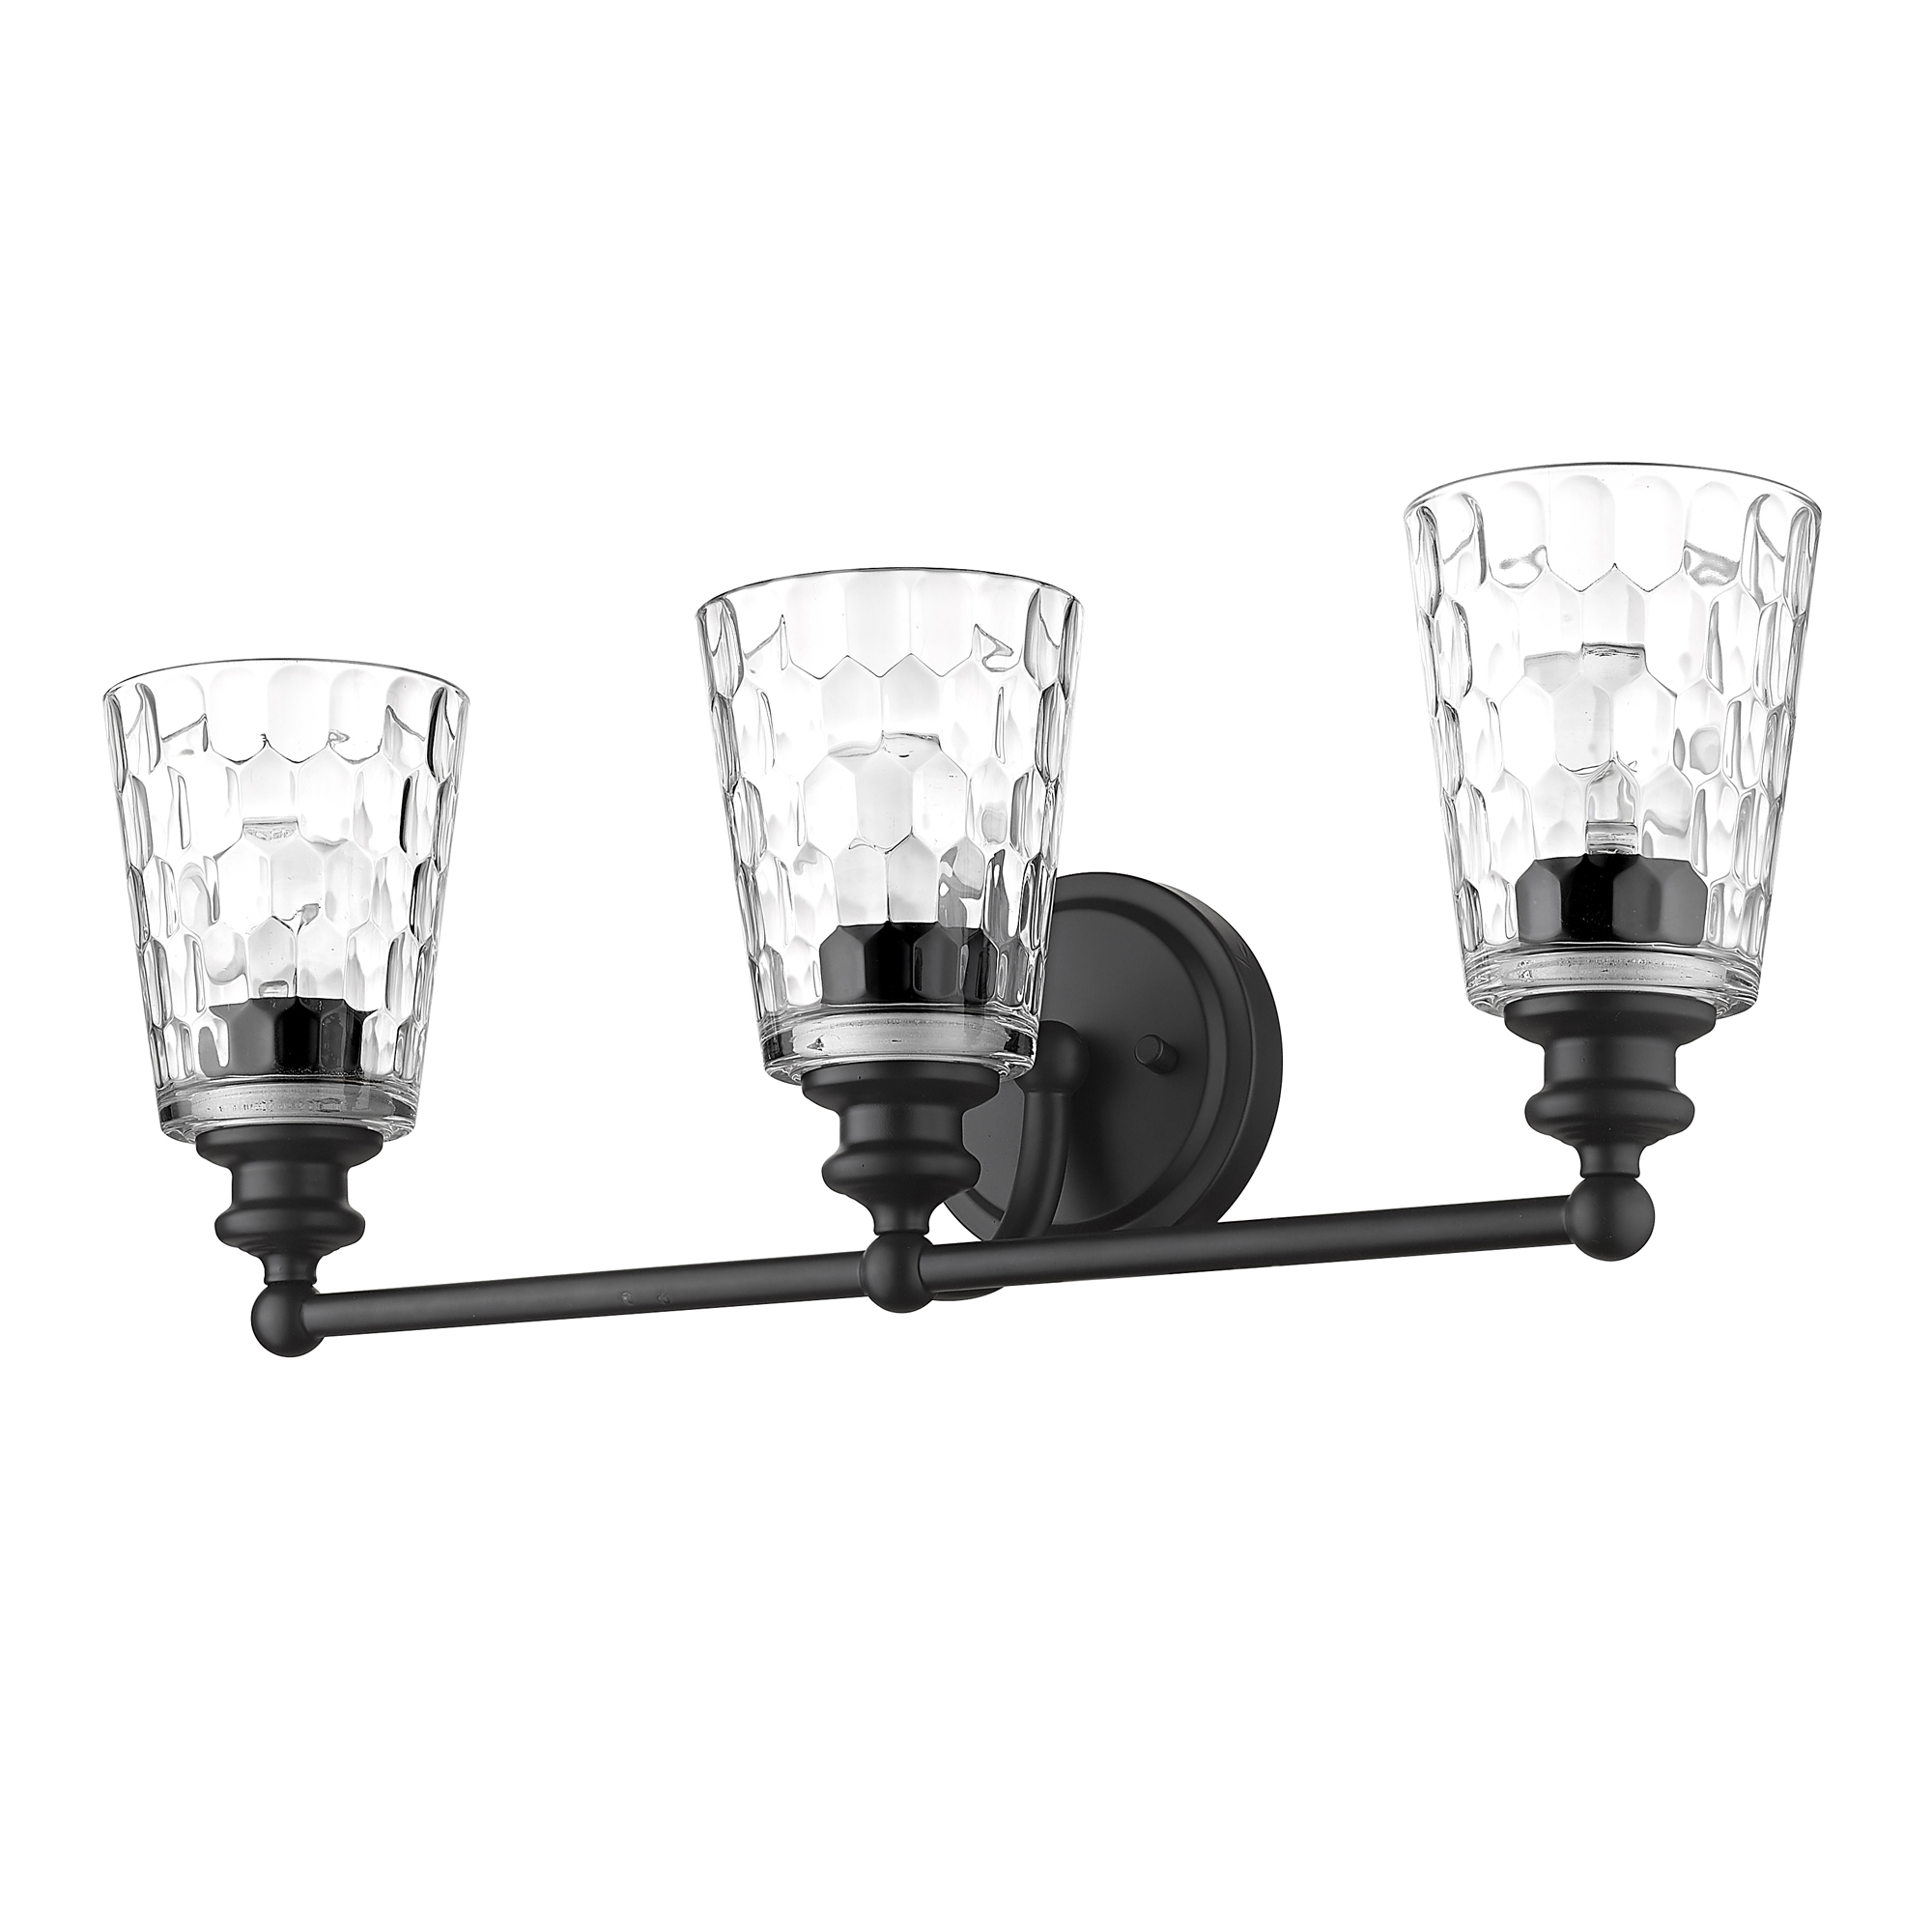 Acclaim Lighting-IN40022BK-Mae - 3 Light Bath Vanity in Transitional Style - 22.75 Inches Wide by 8.5 Inches High   Matte Black Finish with Clear Glass